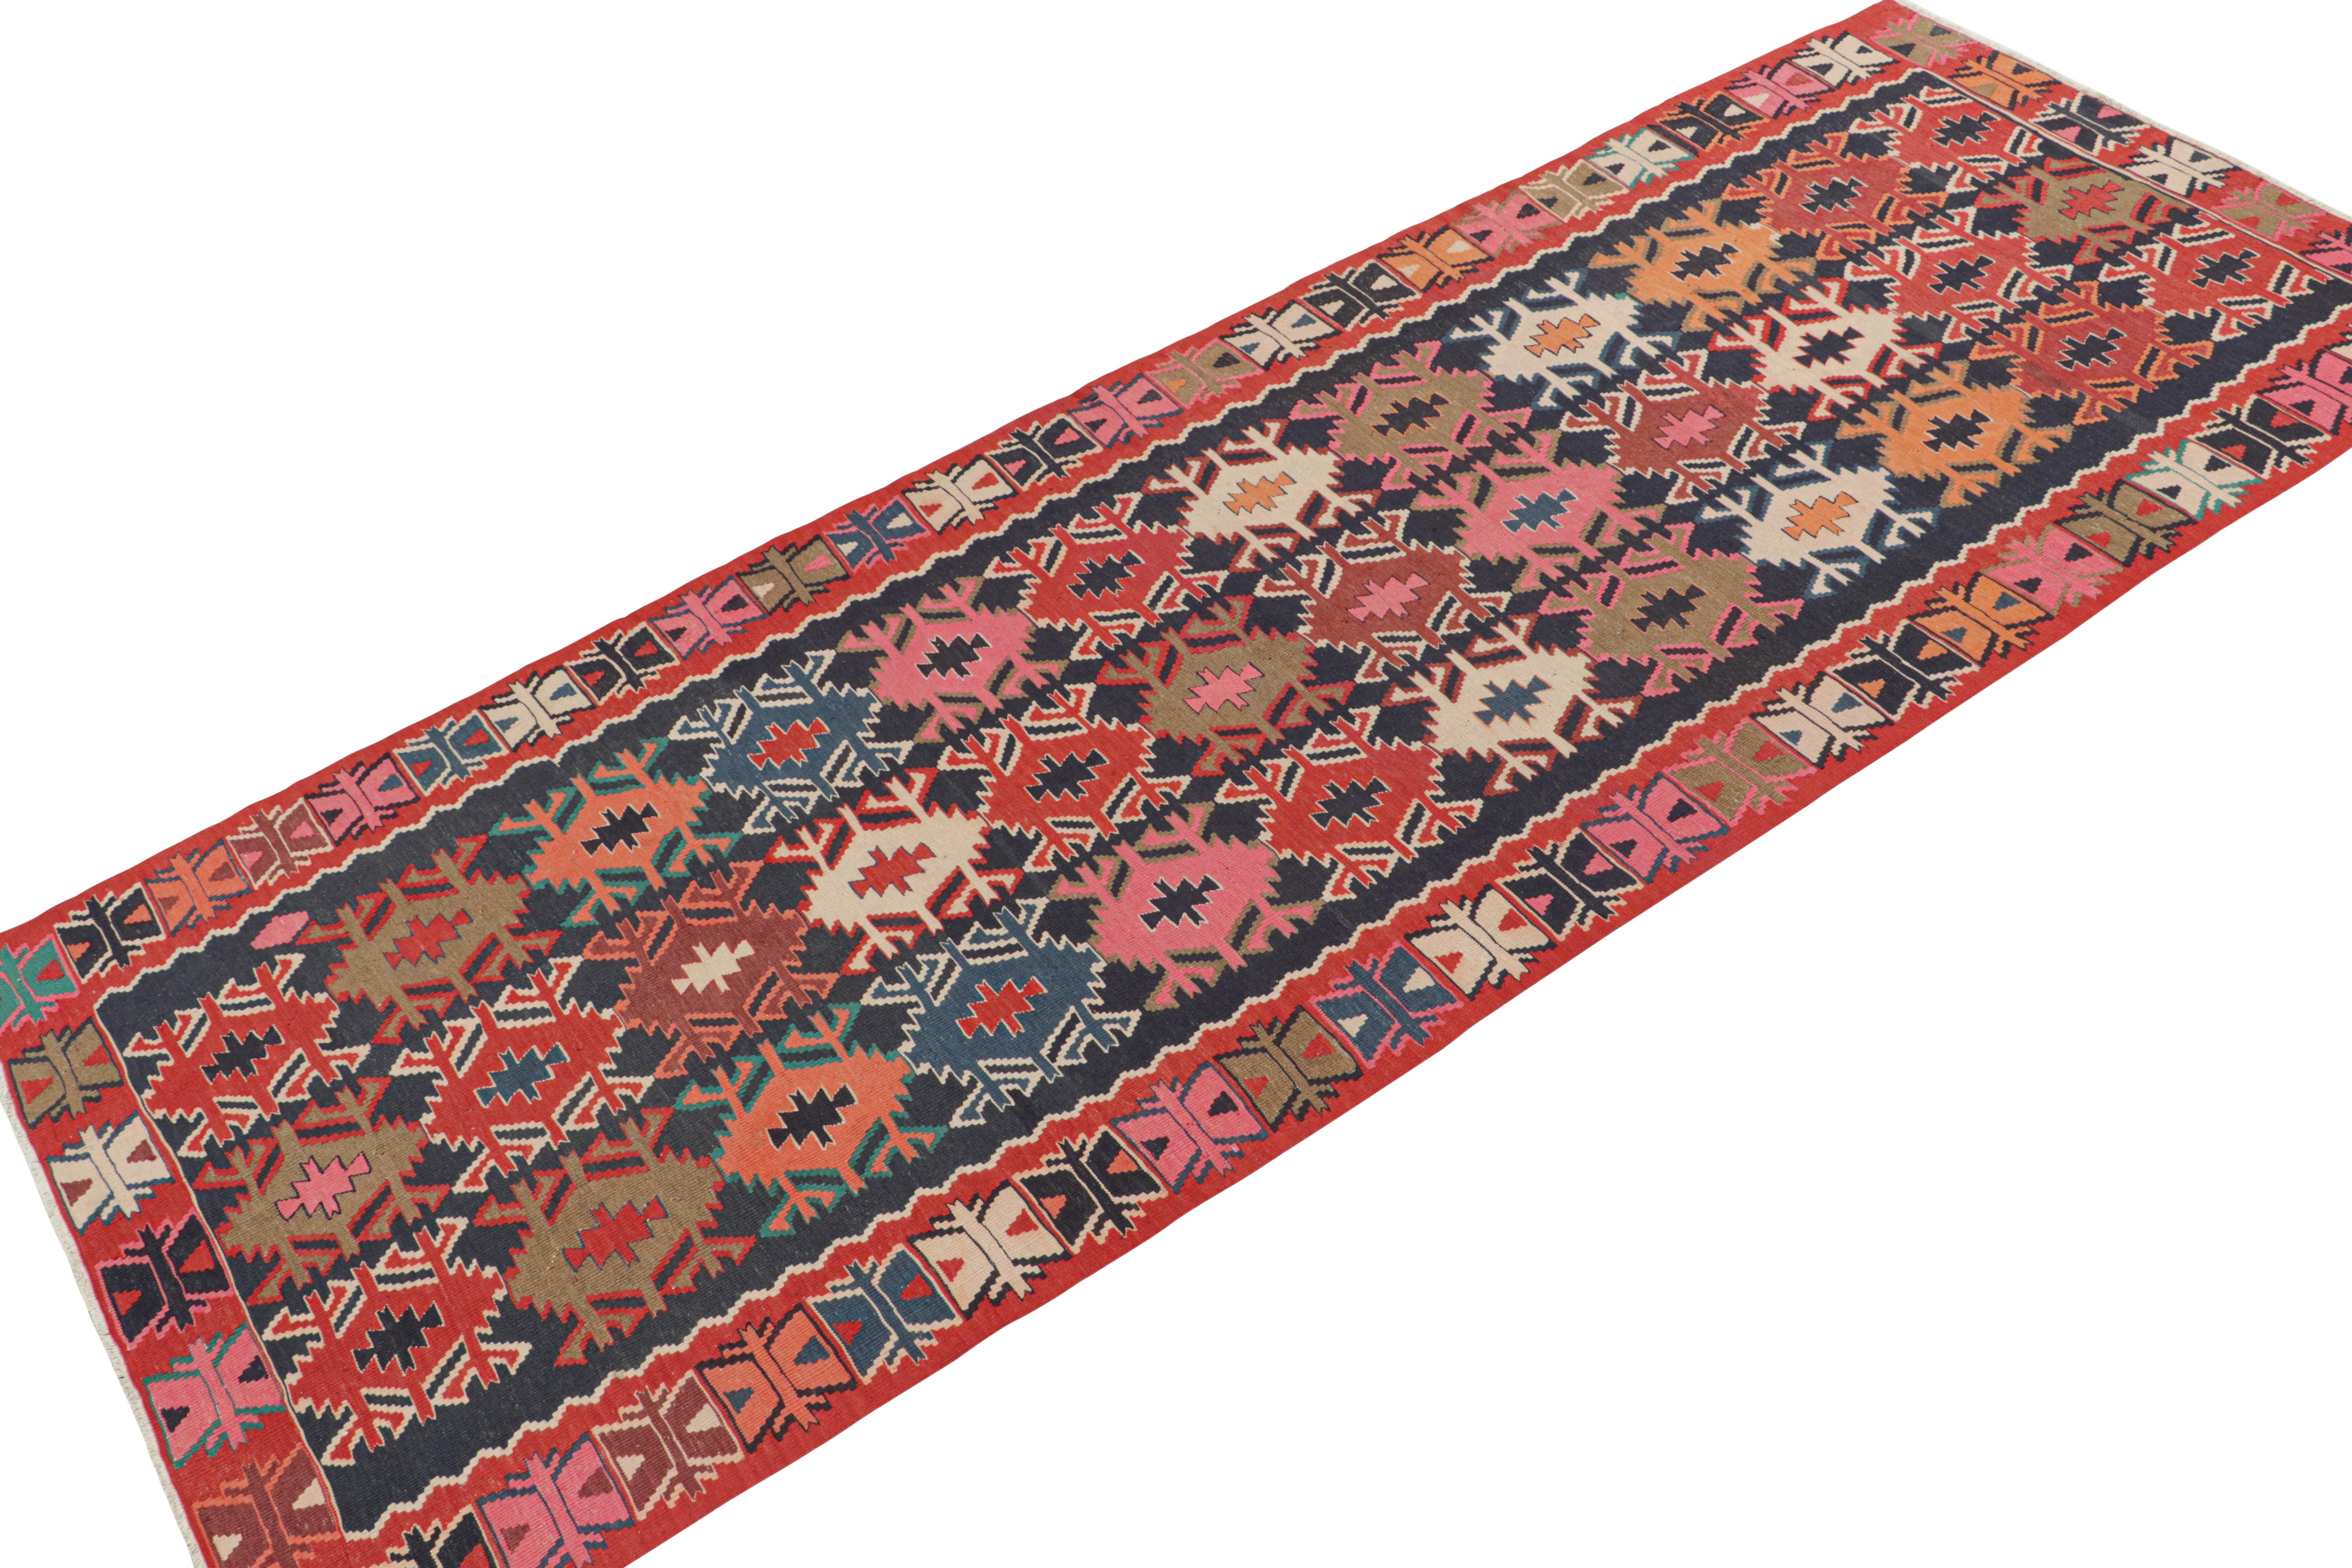 Tribal Vintage Northwest Persian Kilim with Colorful Geometric Patterns by Rug & Kilim For Sale